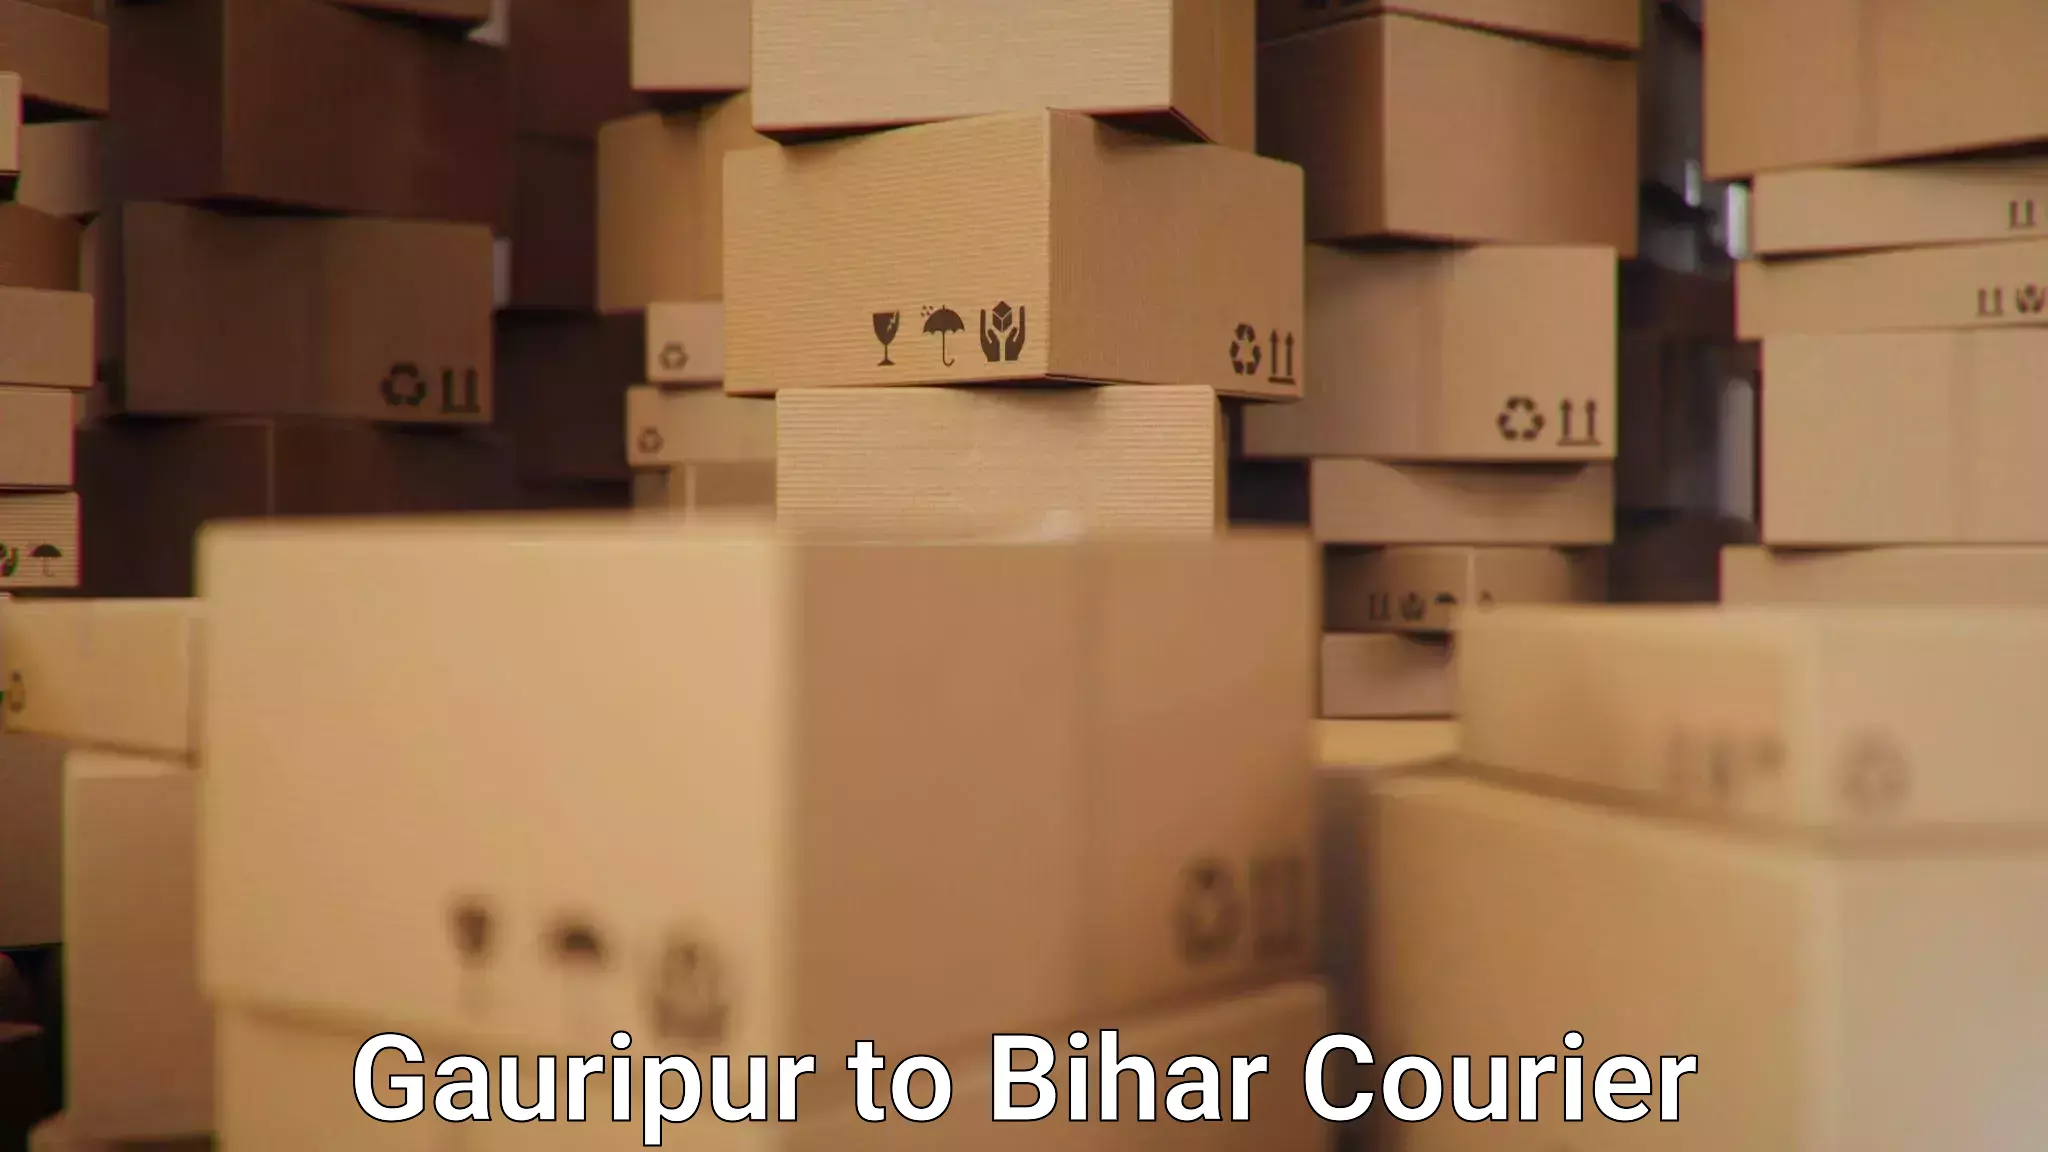 Express delivery capabilities Gauripur to Bihar